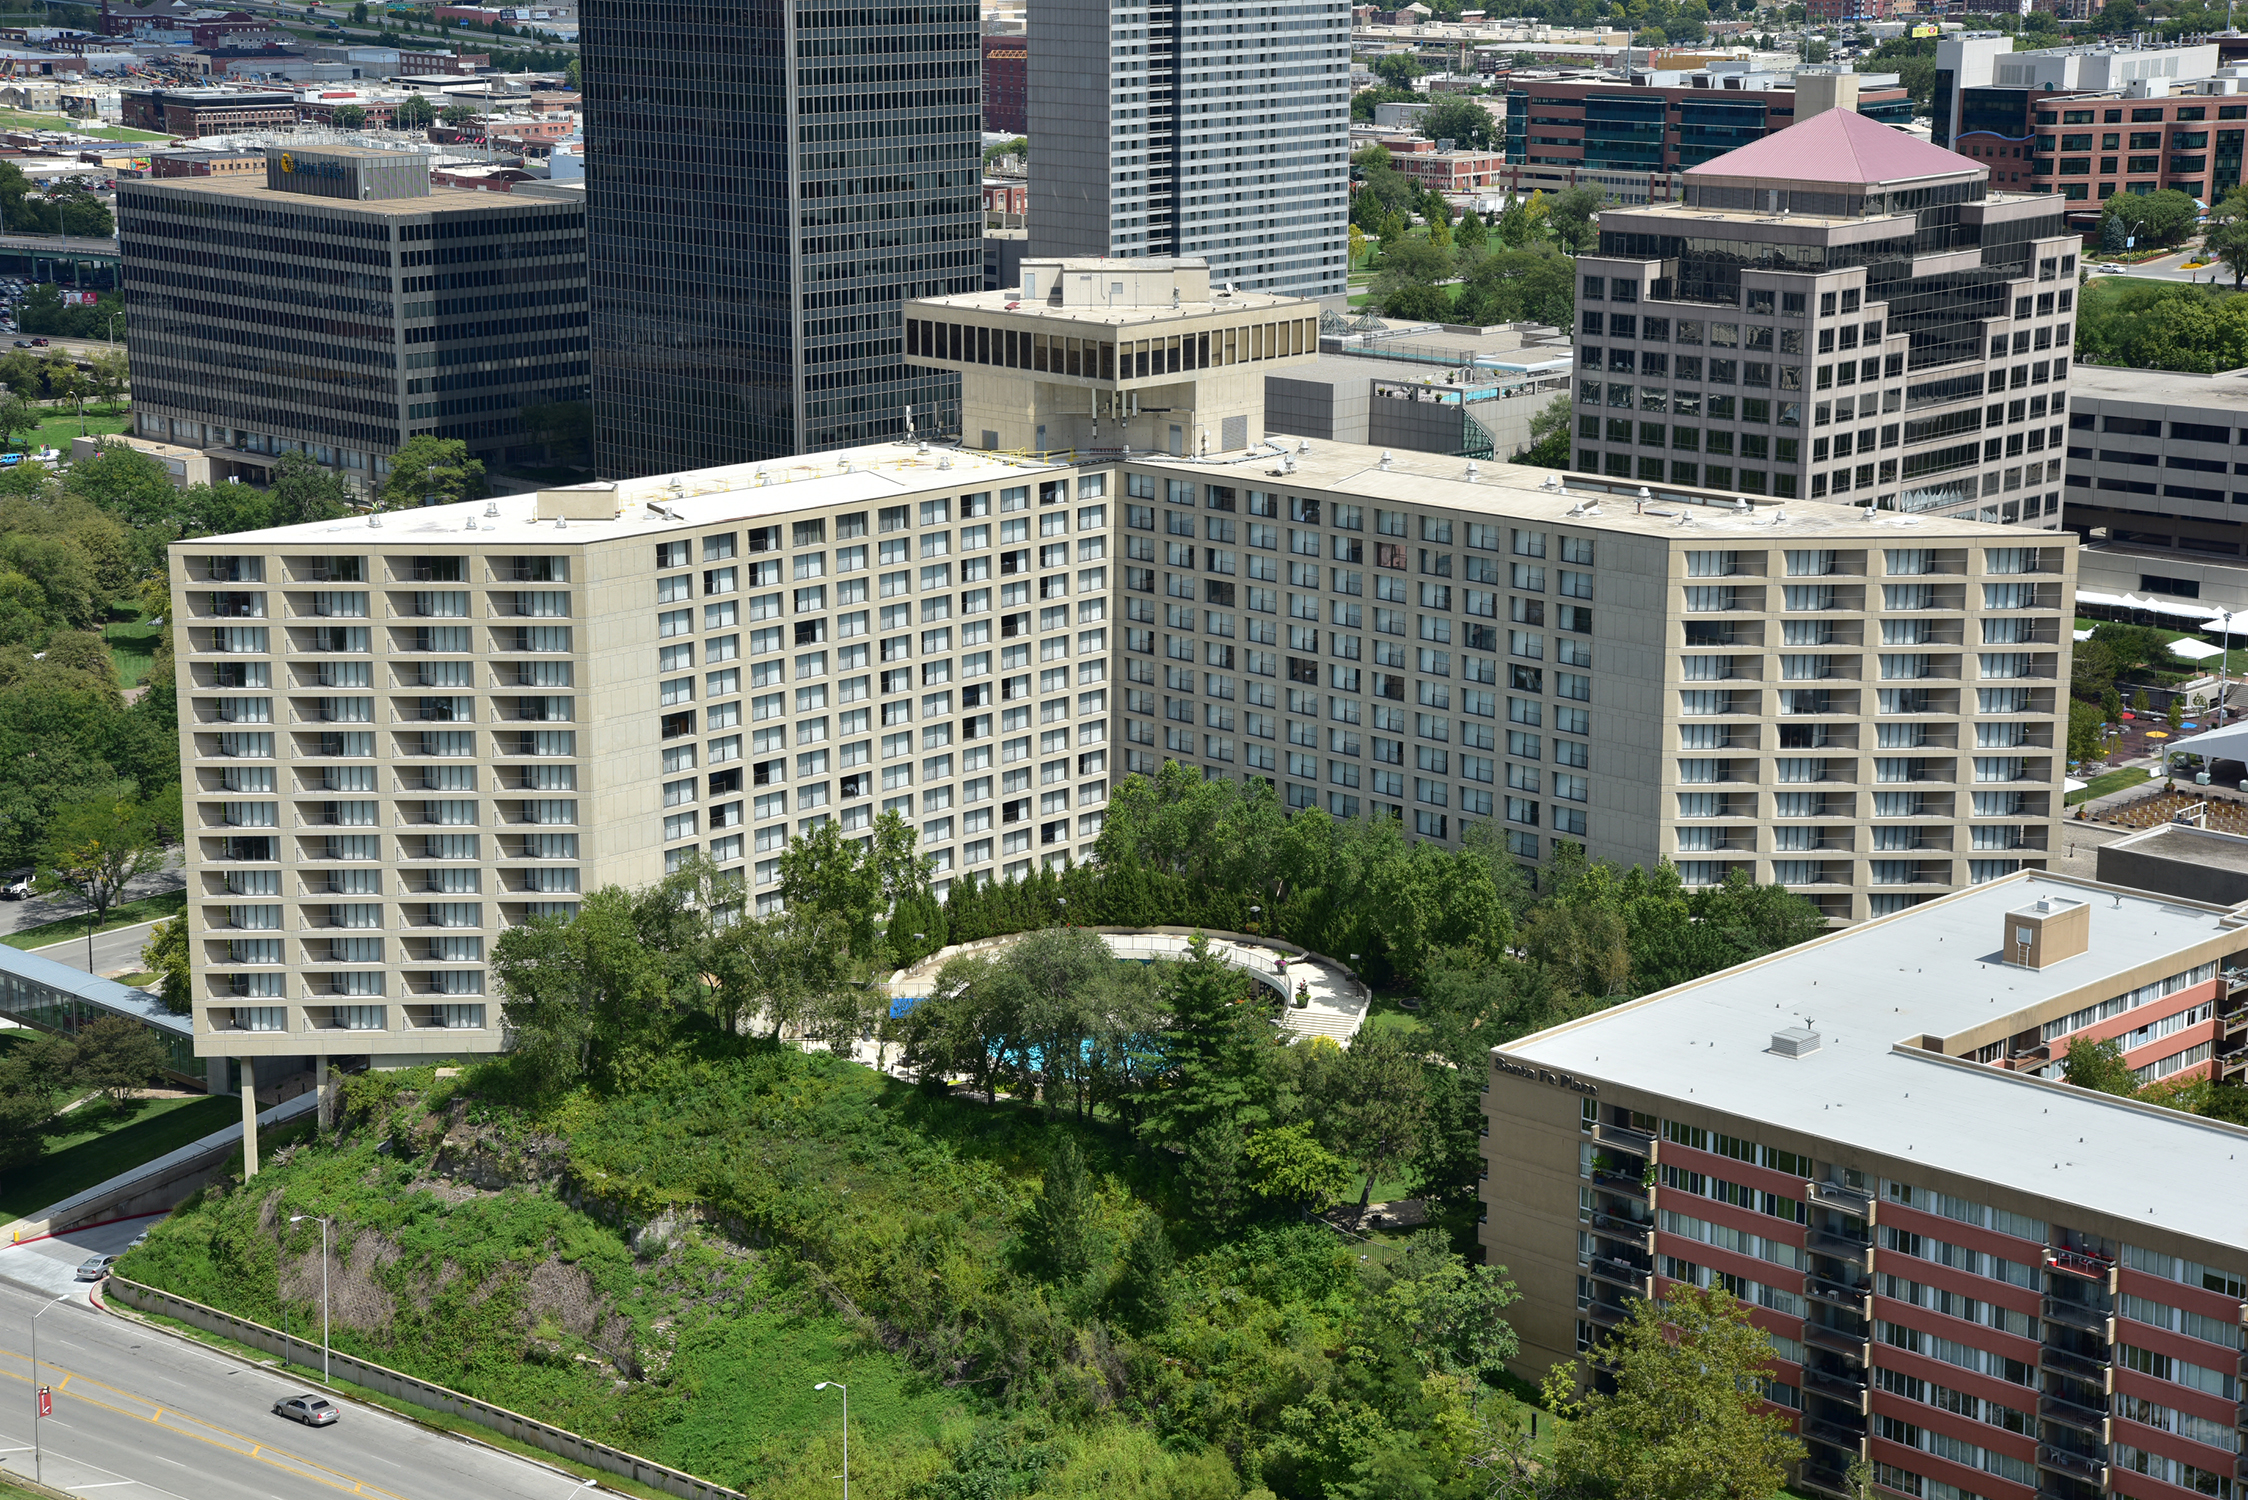 Exterior photo of the Westin from above